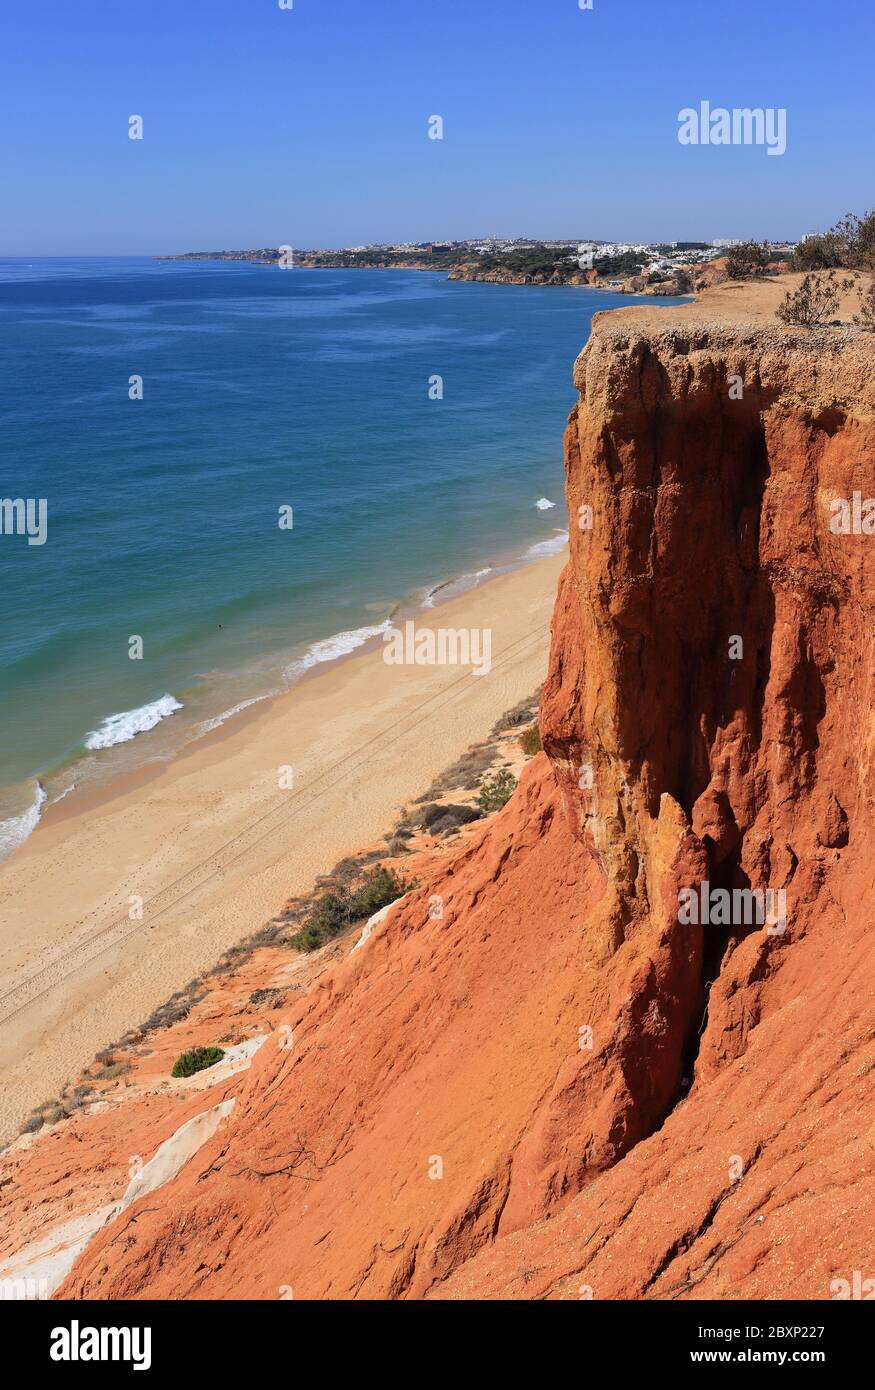 Portugal, Algarve, Albufeira, Olhos D'Agua Beach on the Atlantic Coast. Beautiful sandstone cliff formations and pristine deserted golden sandy beach. Stock Photo